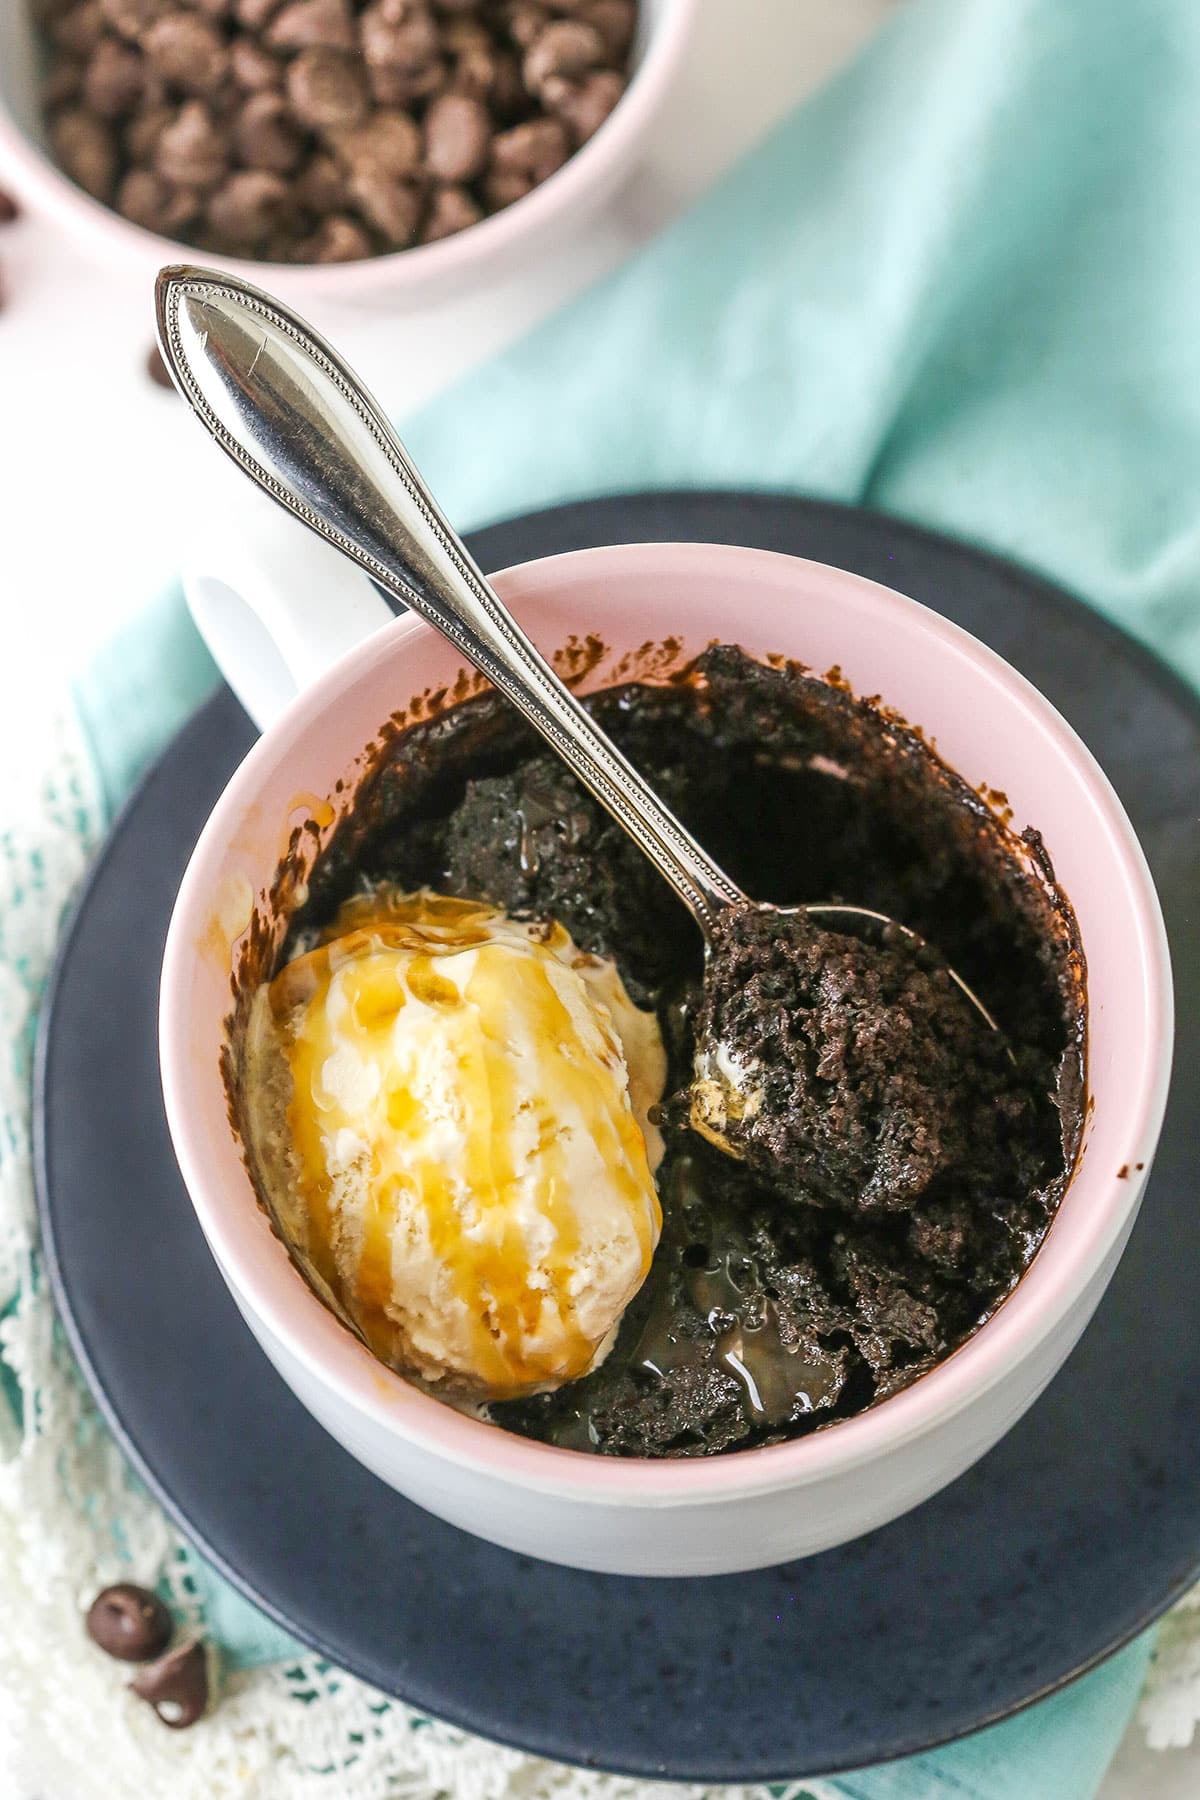 Overhead view of a Chocolate Mug Cake with a scoop of ice cream and a scoop of cake missing in a pink bowl